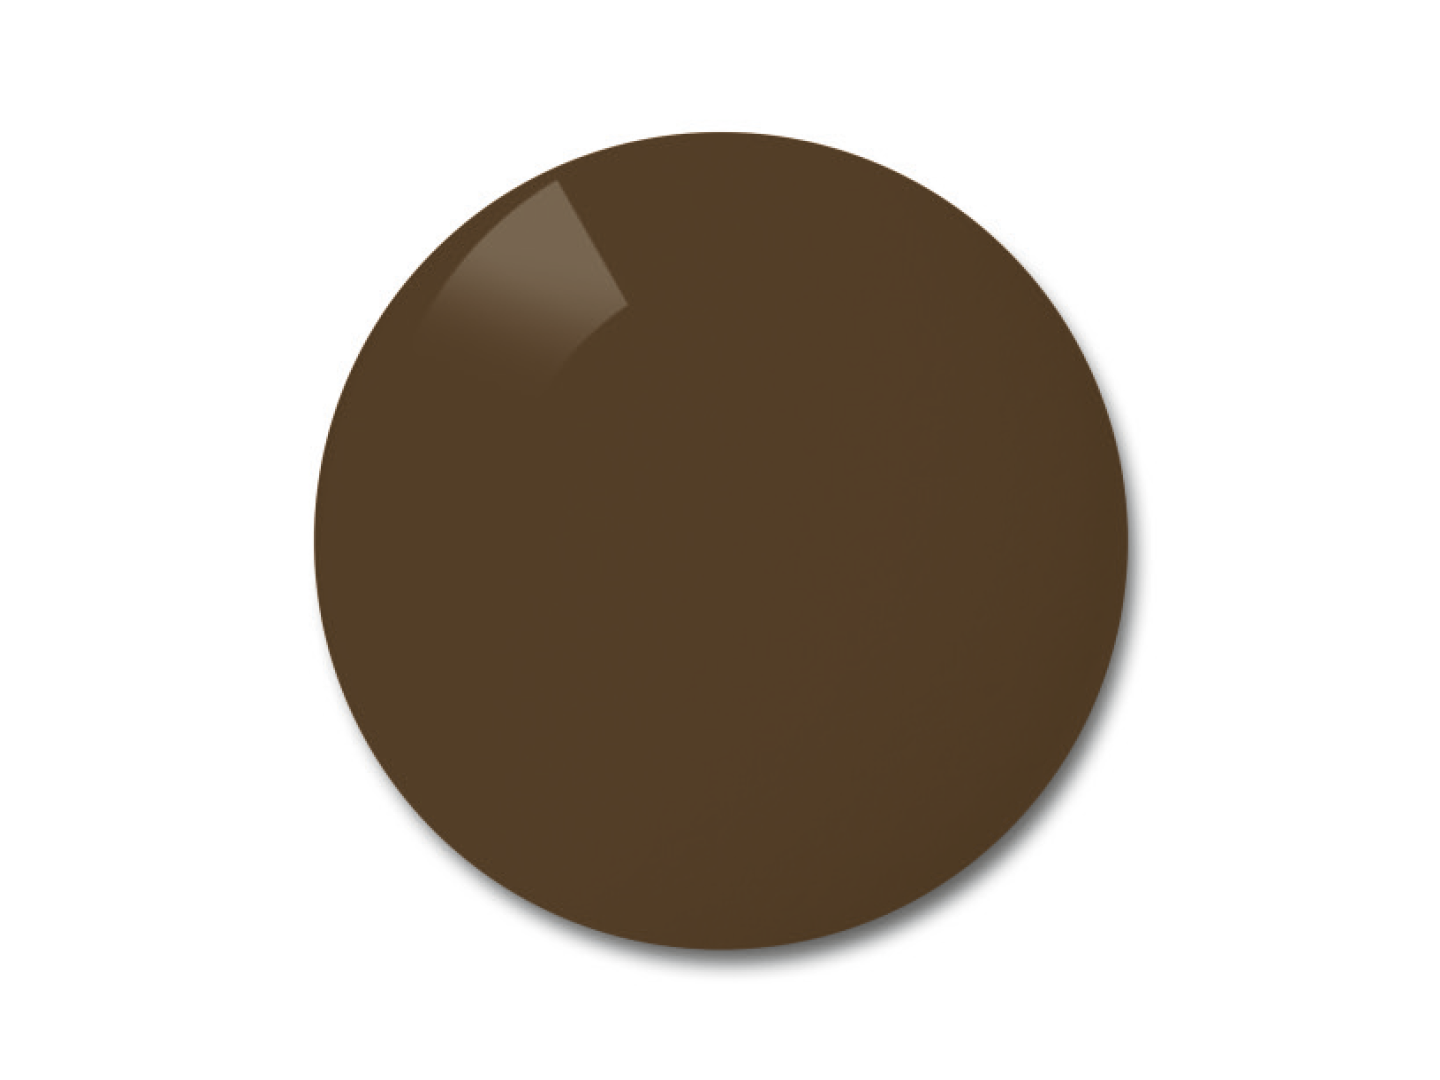 Color example for the brown polarized lenses. 